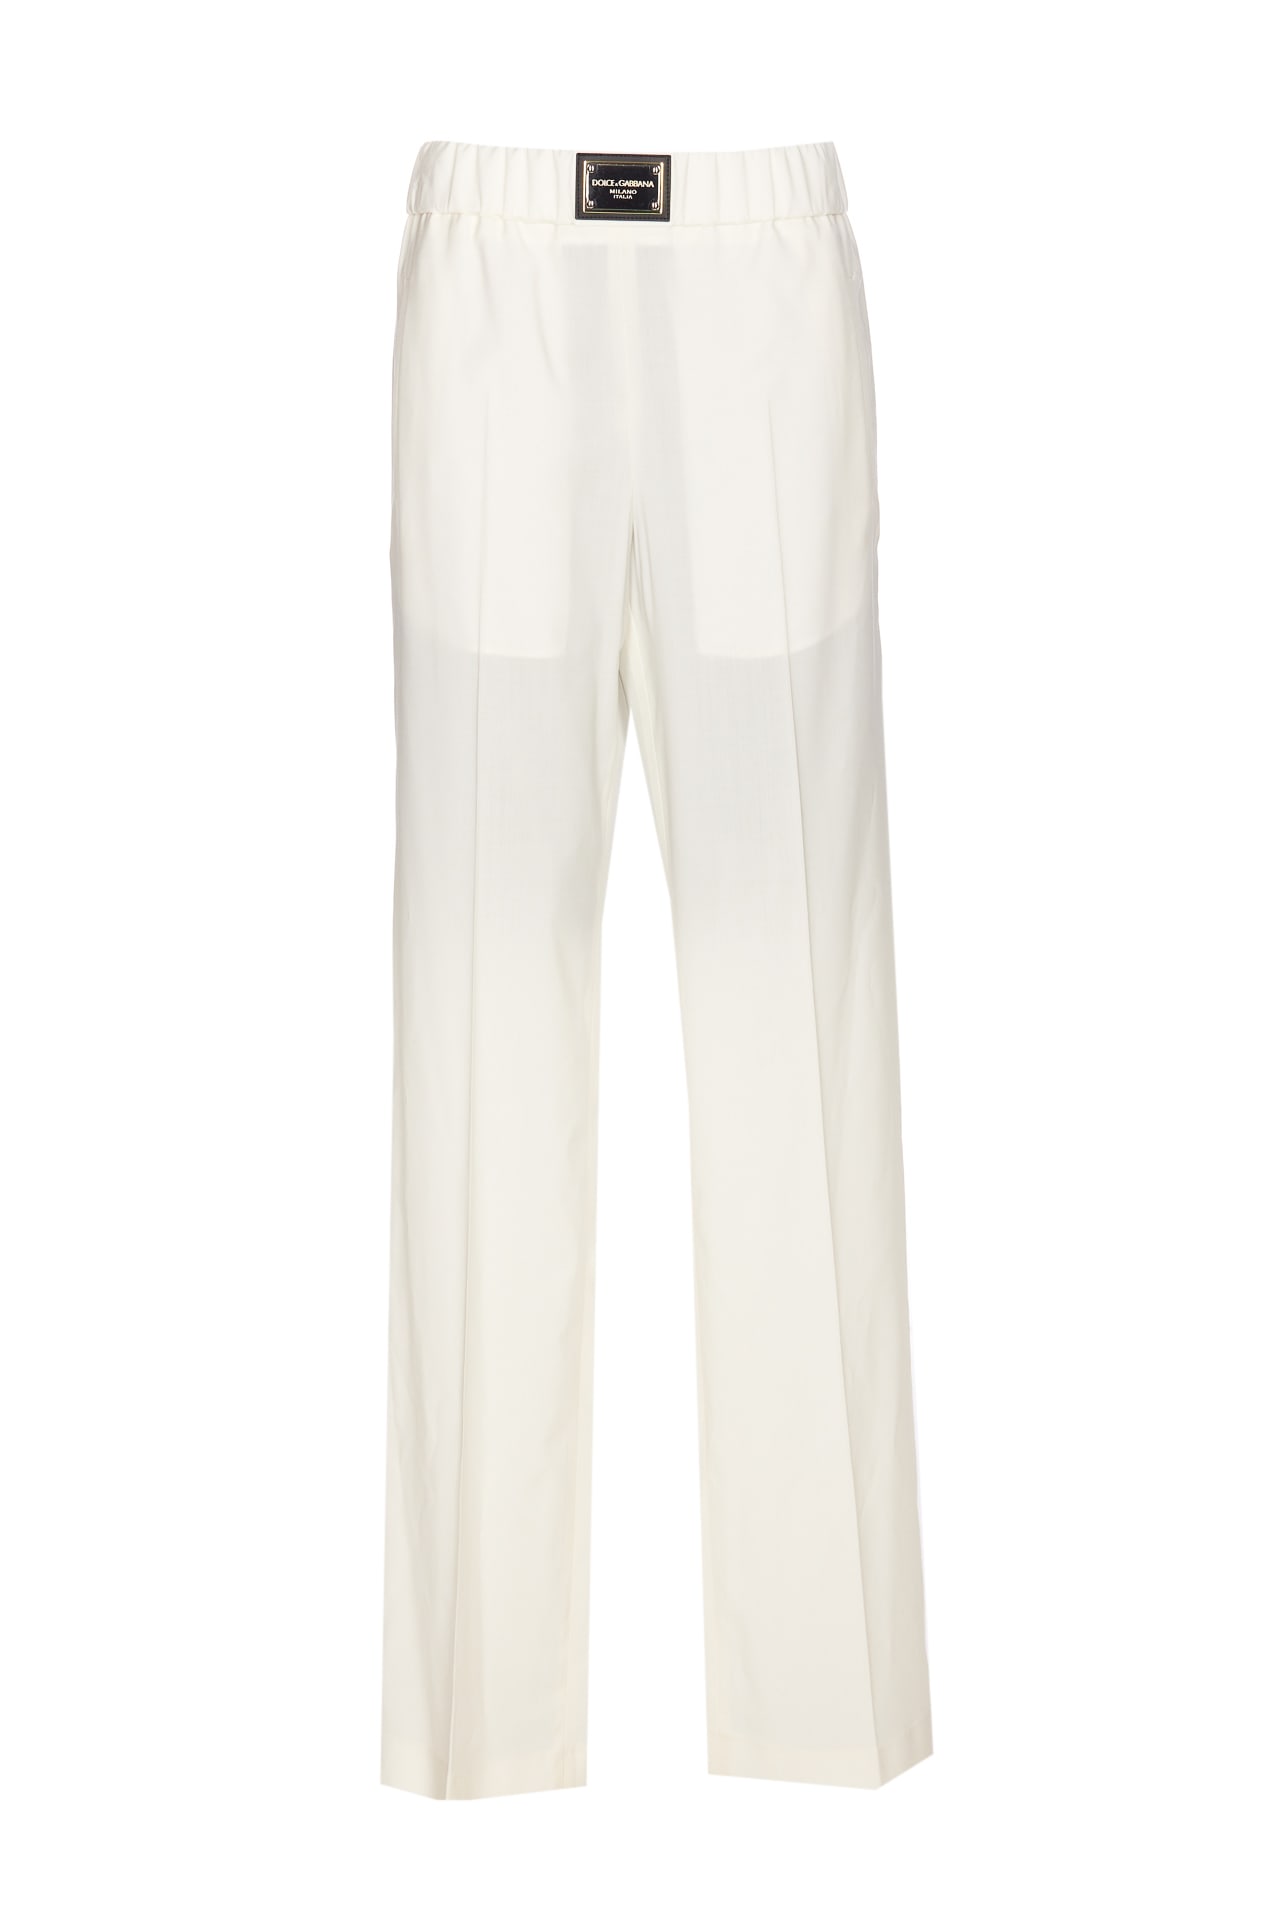 DOLCE & GABBANA FLARE TROUSERS WITH LOGO PLAQUE